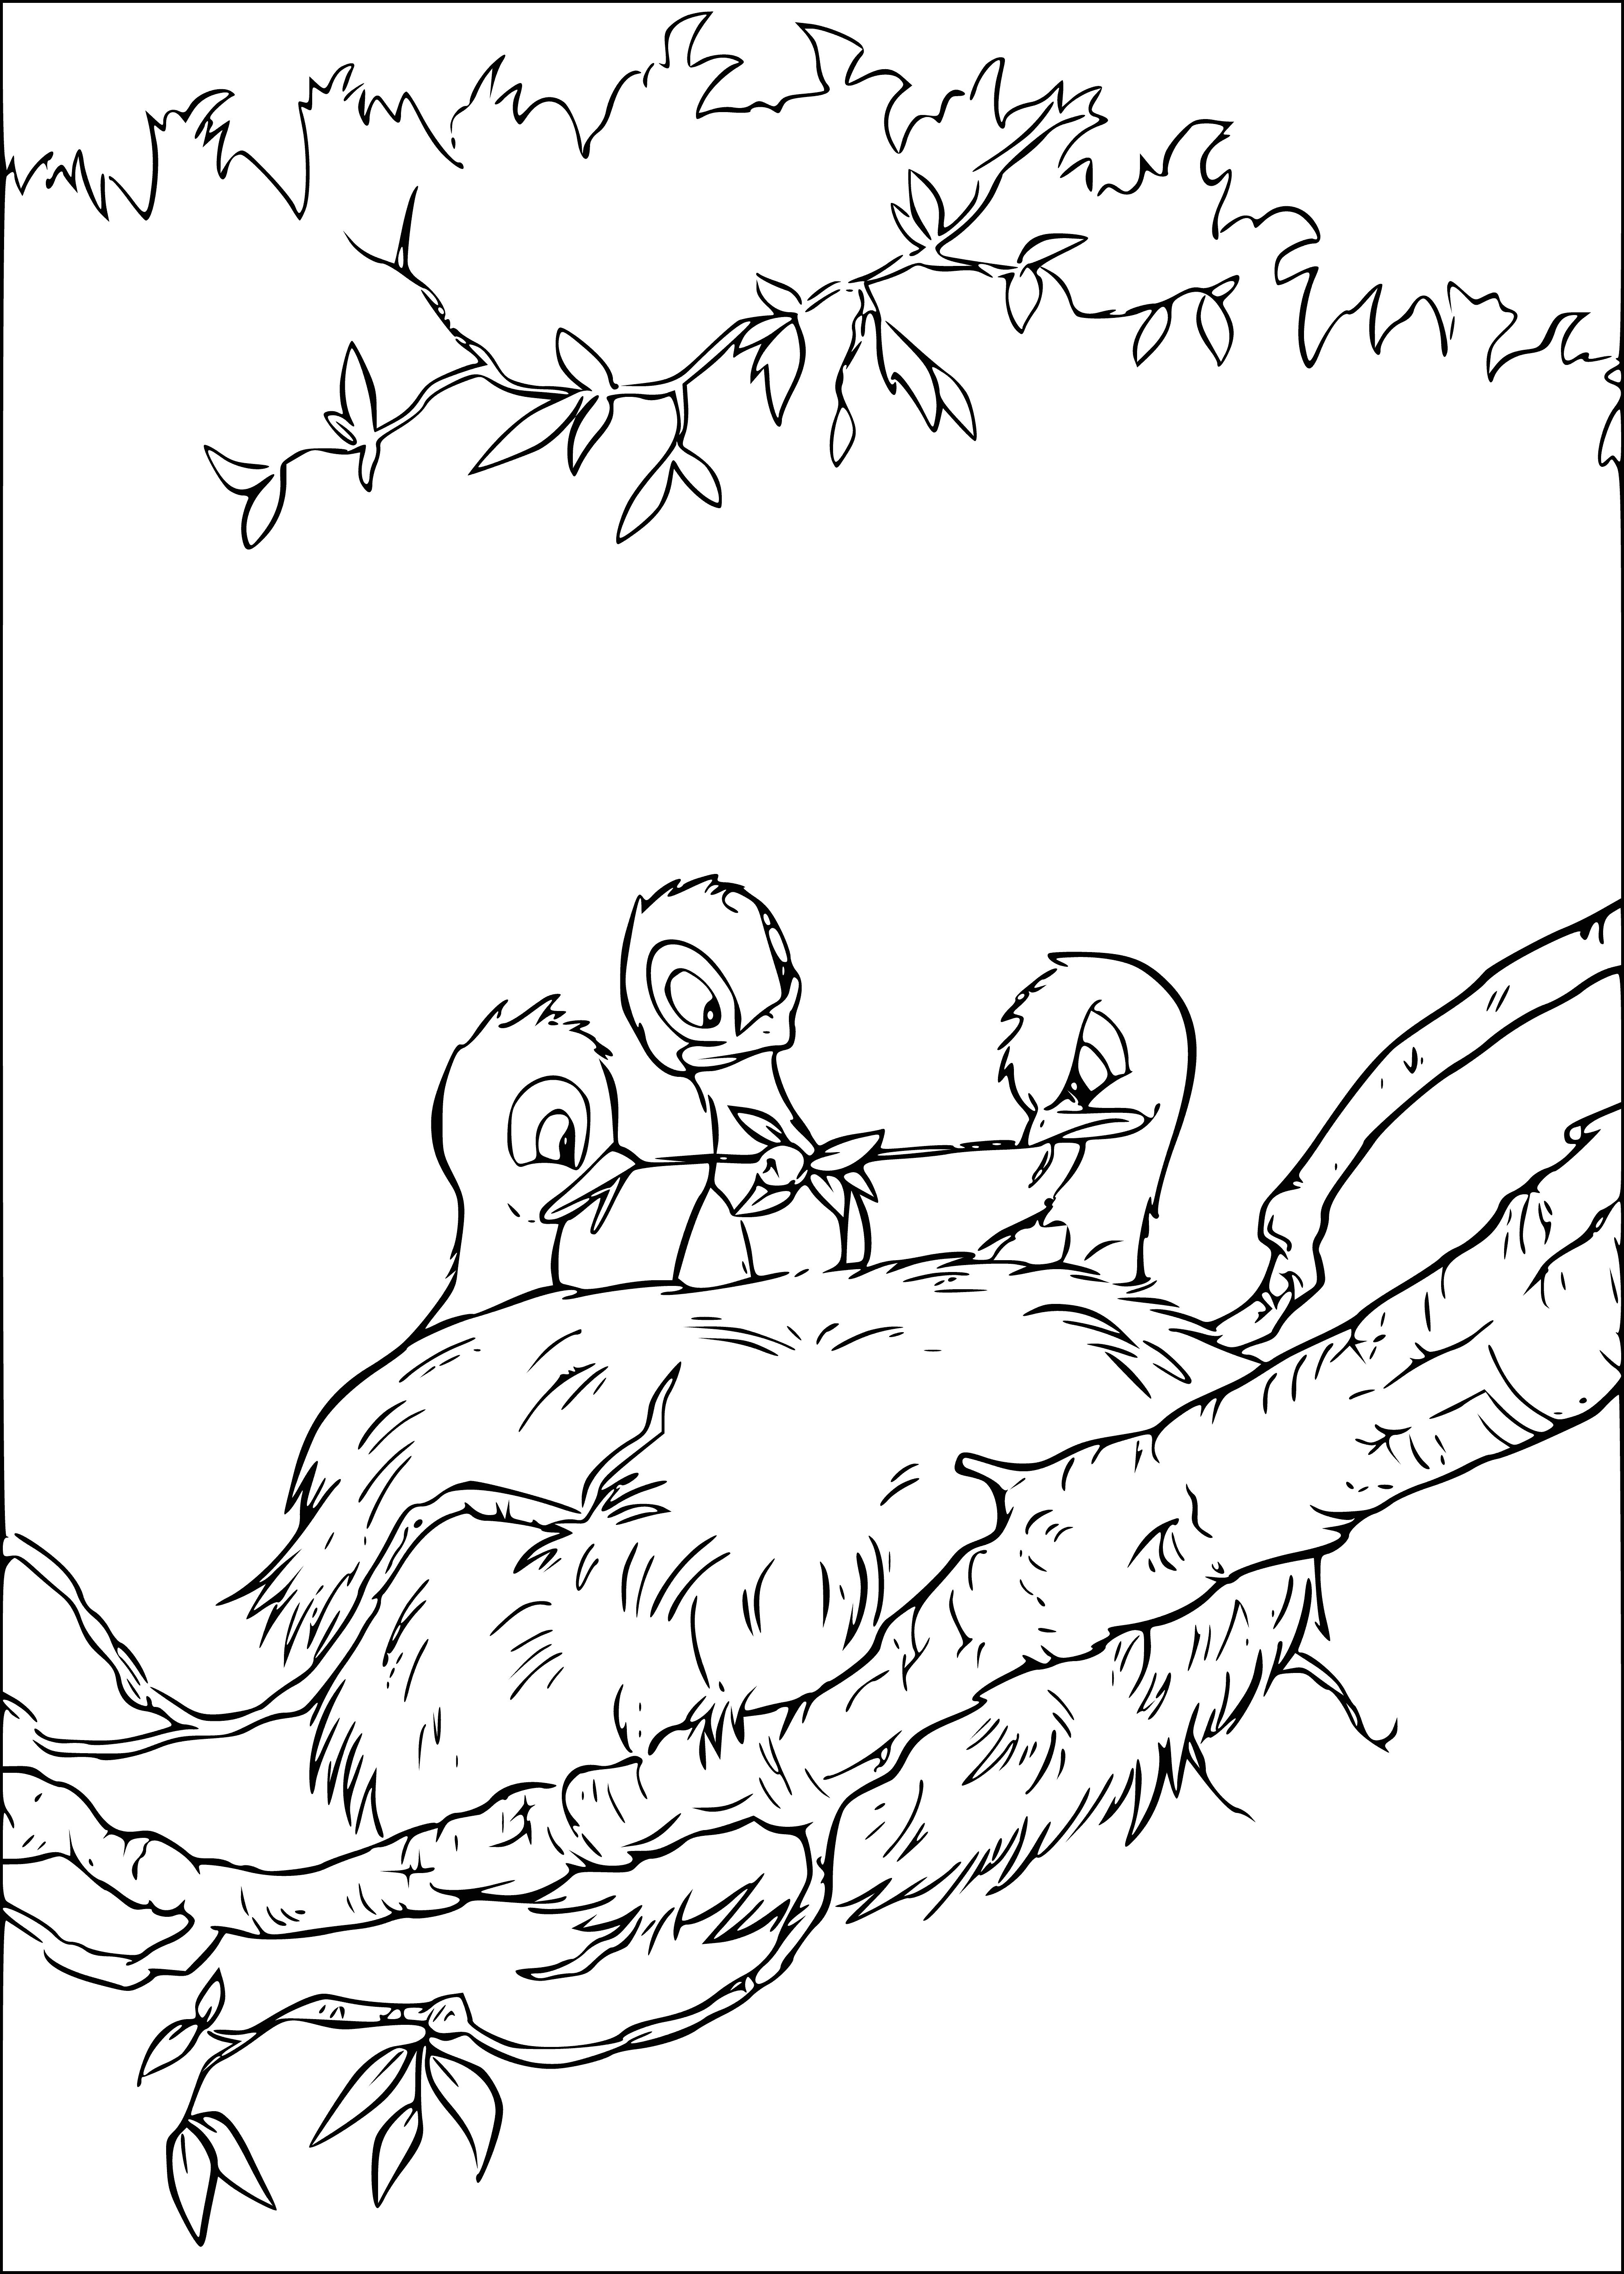 coloring page: 3 chicks fill a small nest of twigs & leaves, 1 black, 1 brown, & 1 white.